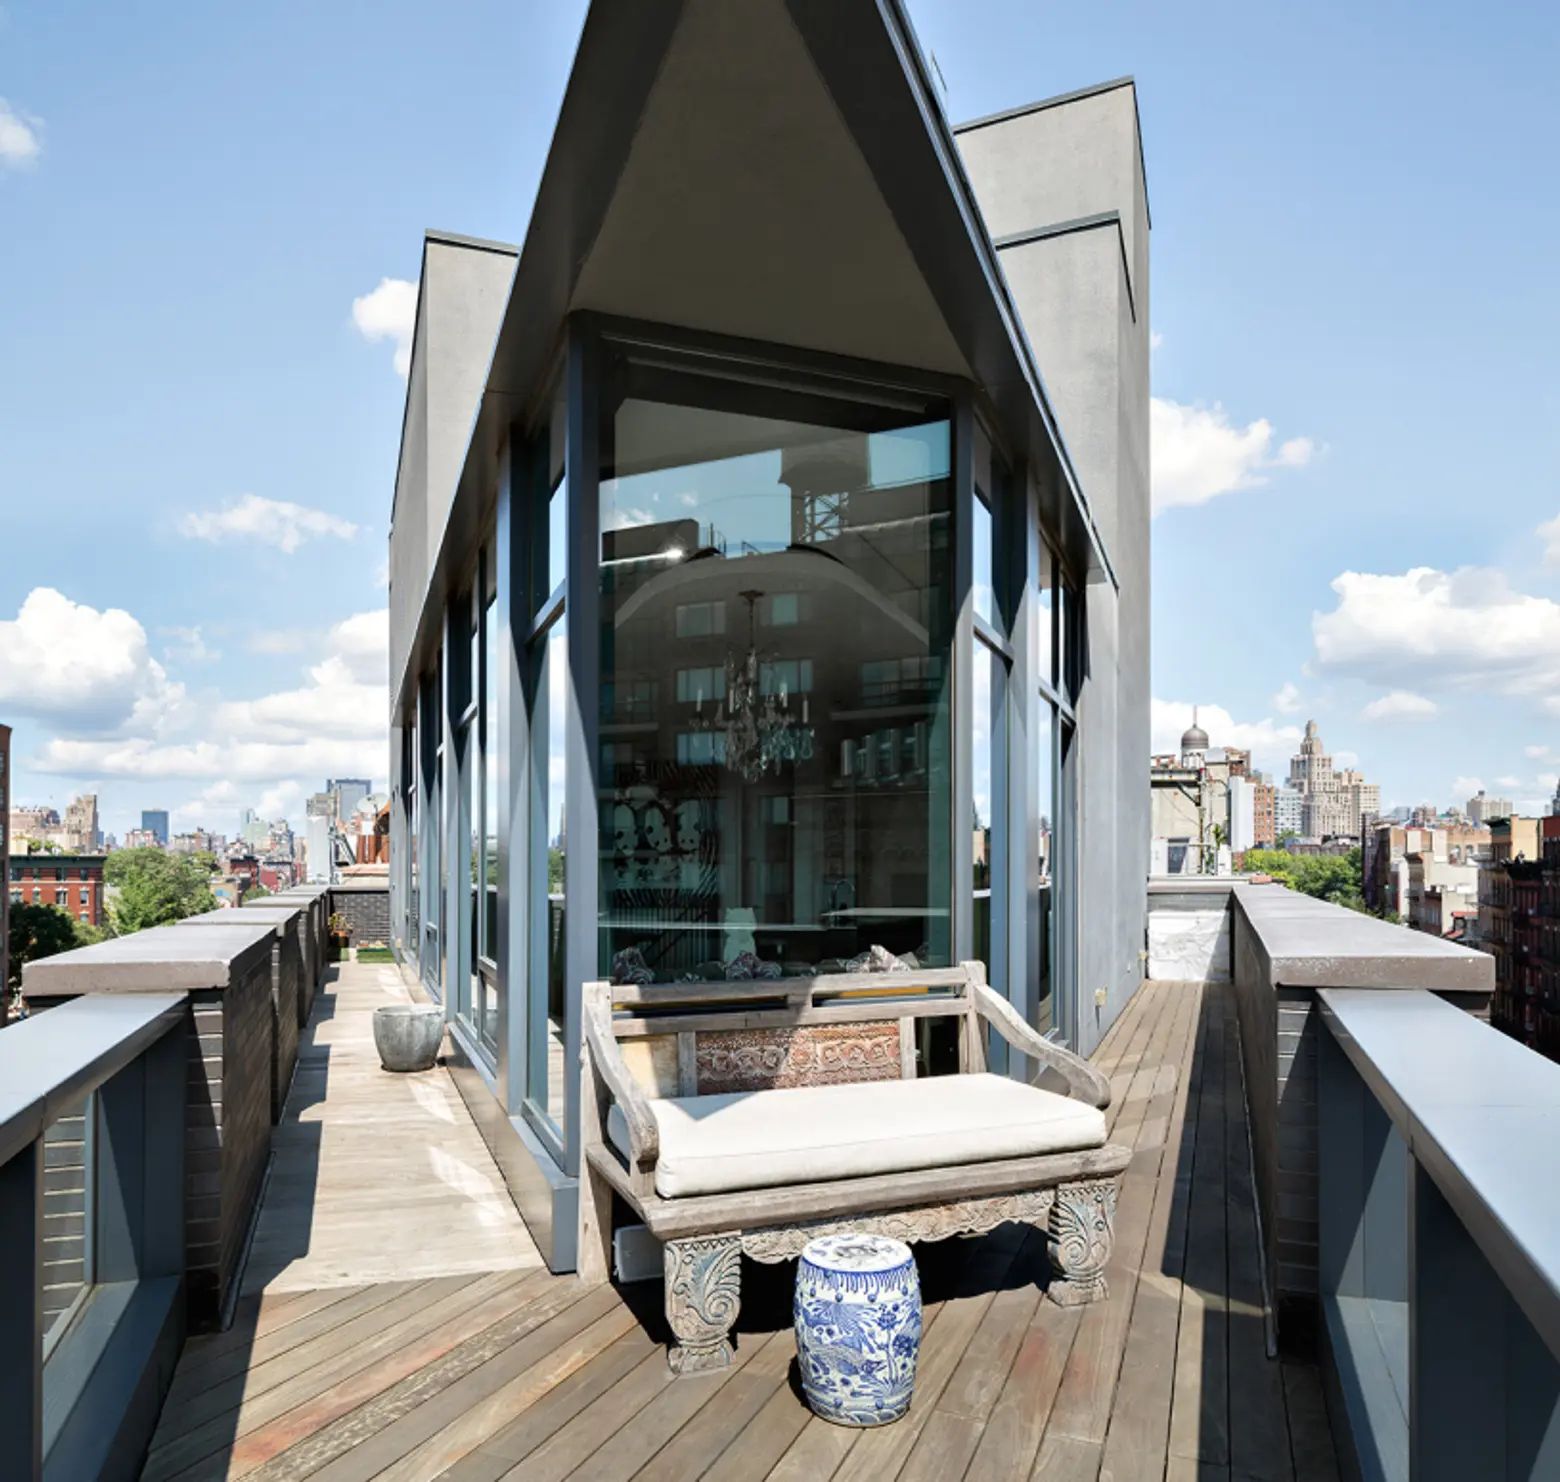 1 7th Avenue South, Rogers Marvel, Cool Listings, Penthouse, Greenwich Village, Rentals, Manhattan penthouse for rent,